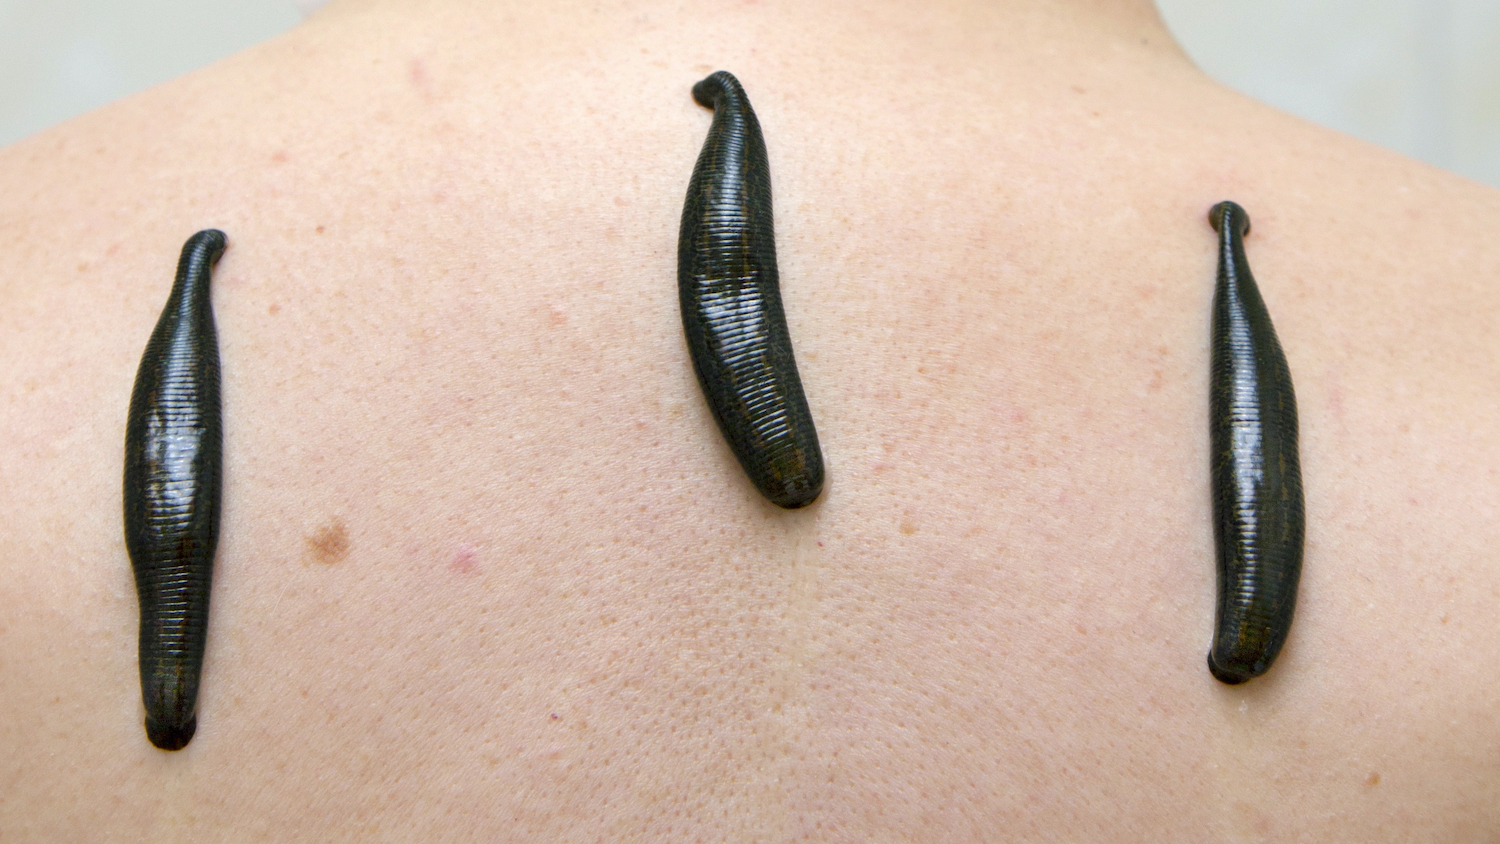 Leeches for atopic dermatitis – how can they help?